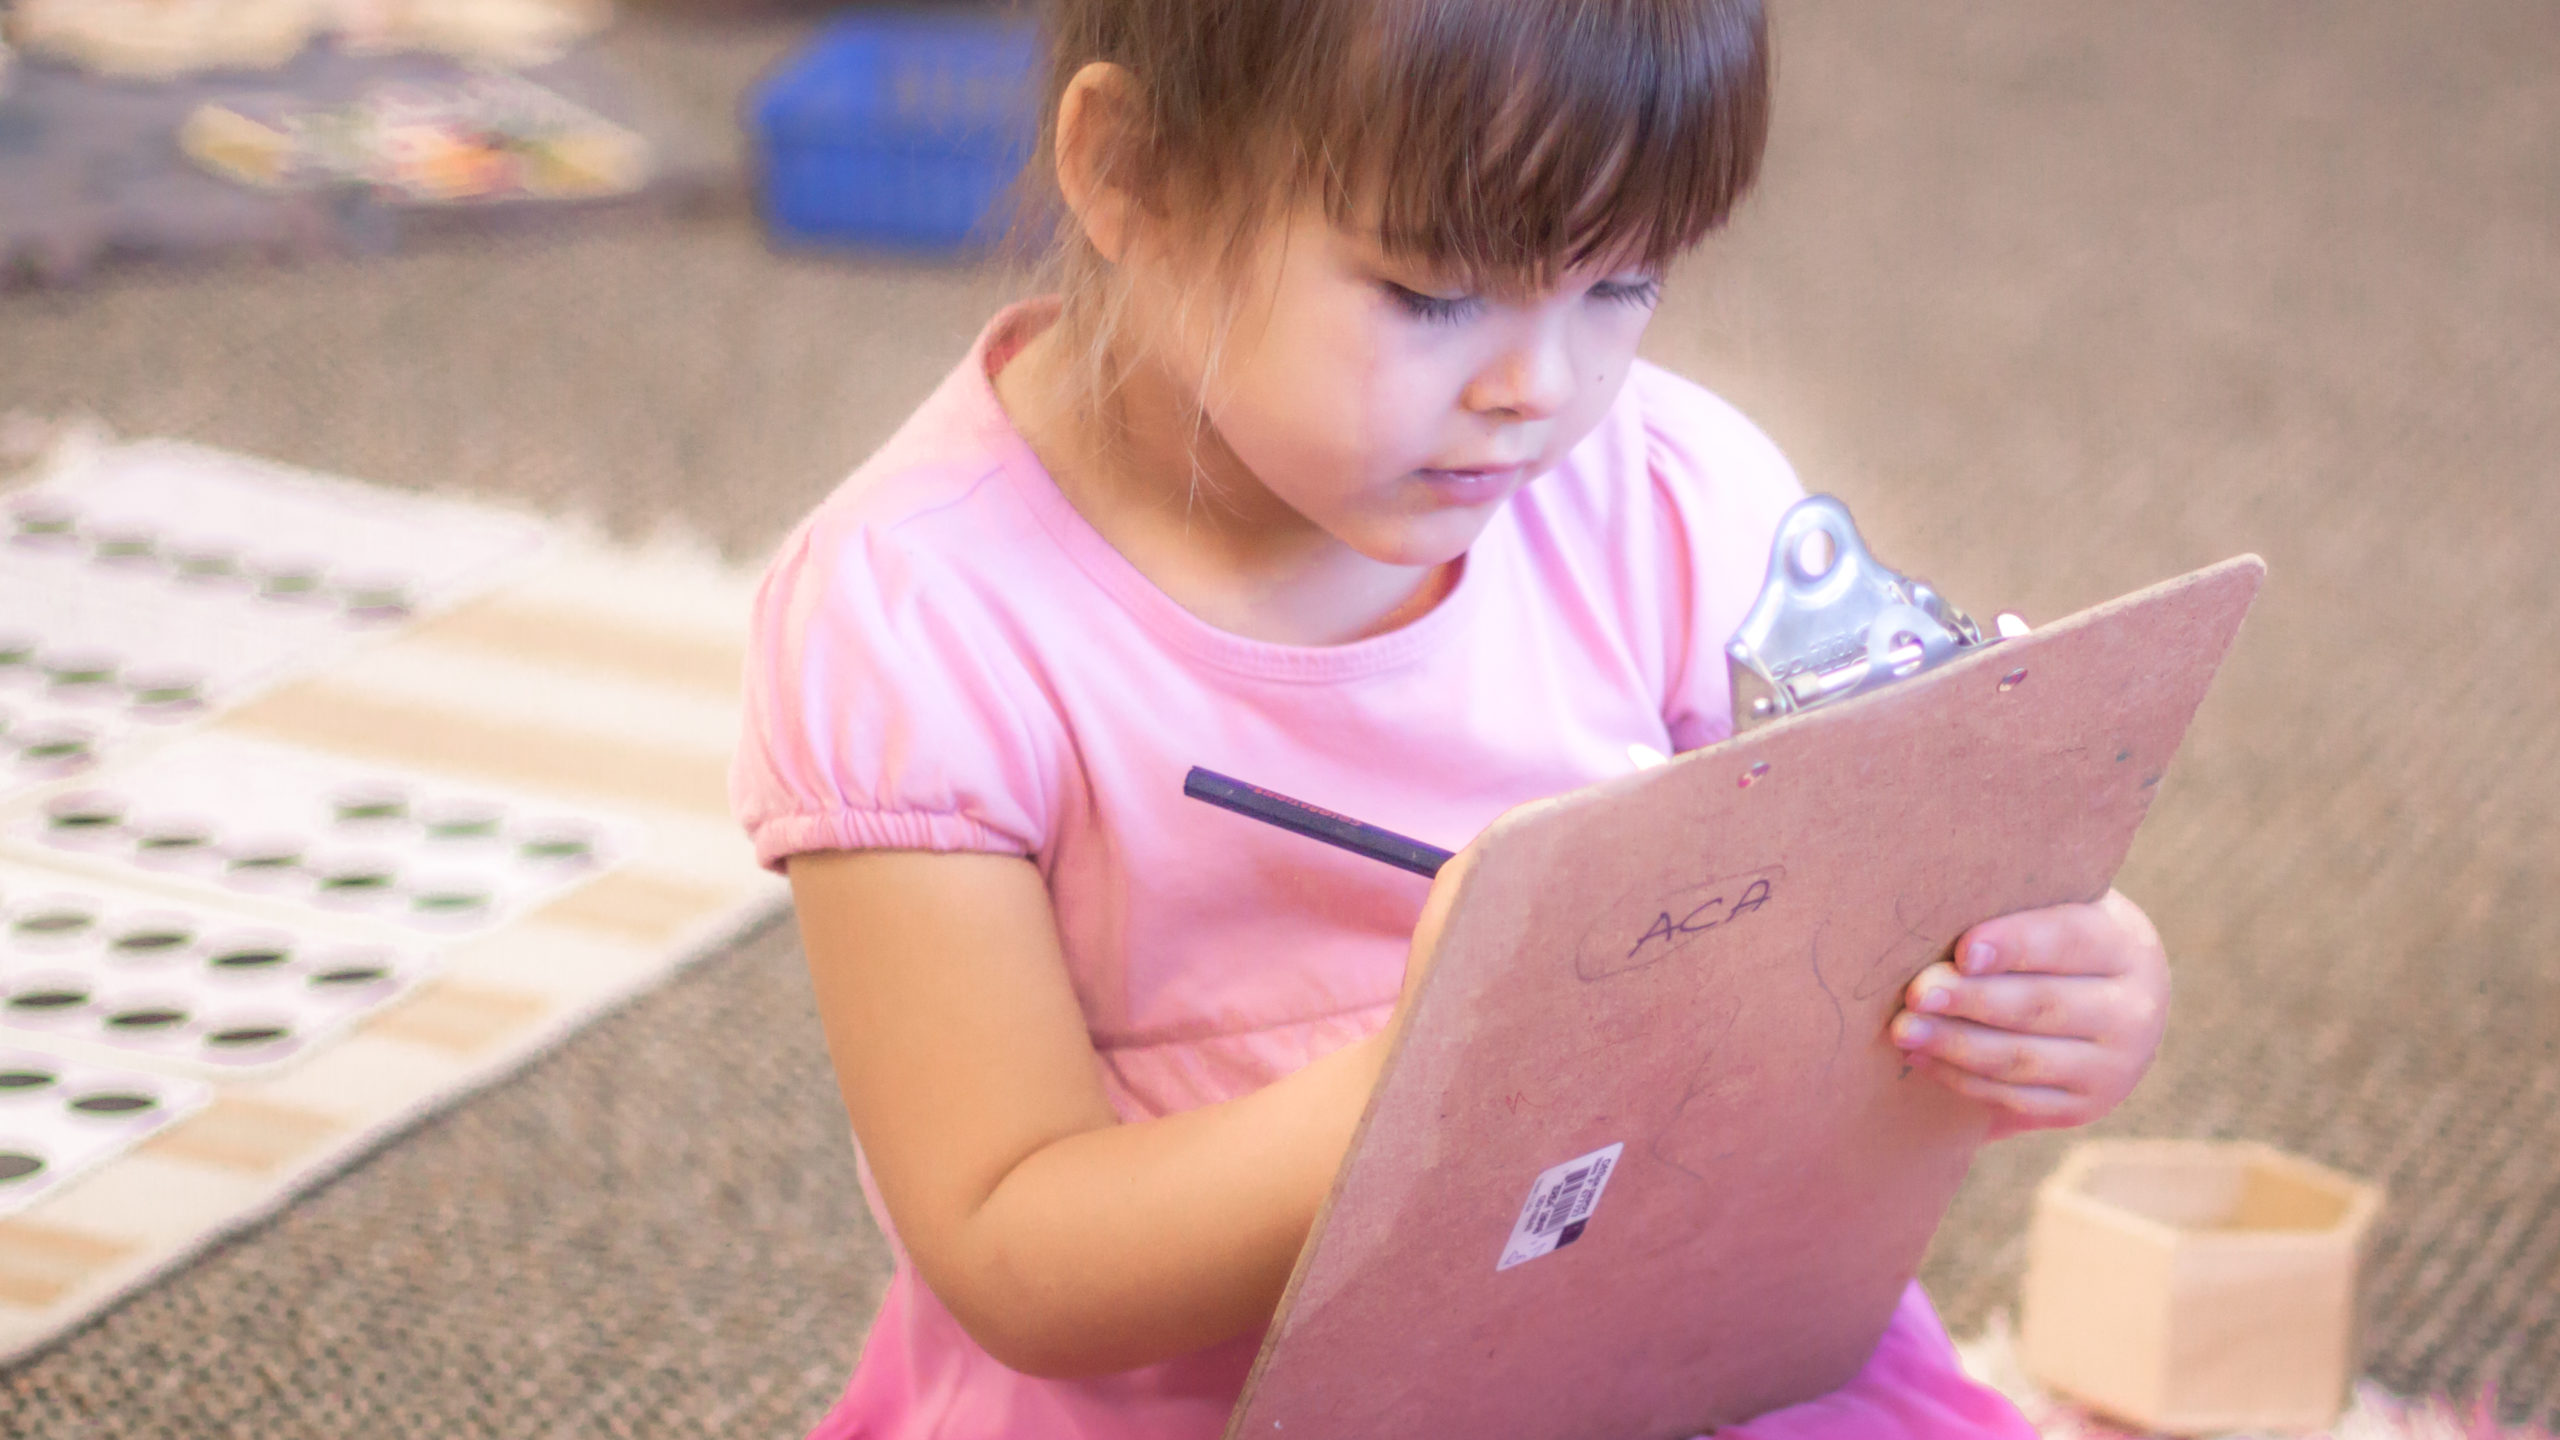 Three Reasons Montessori Parents Know They’ve Made the Right Choice